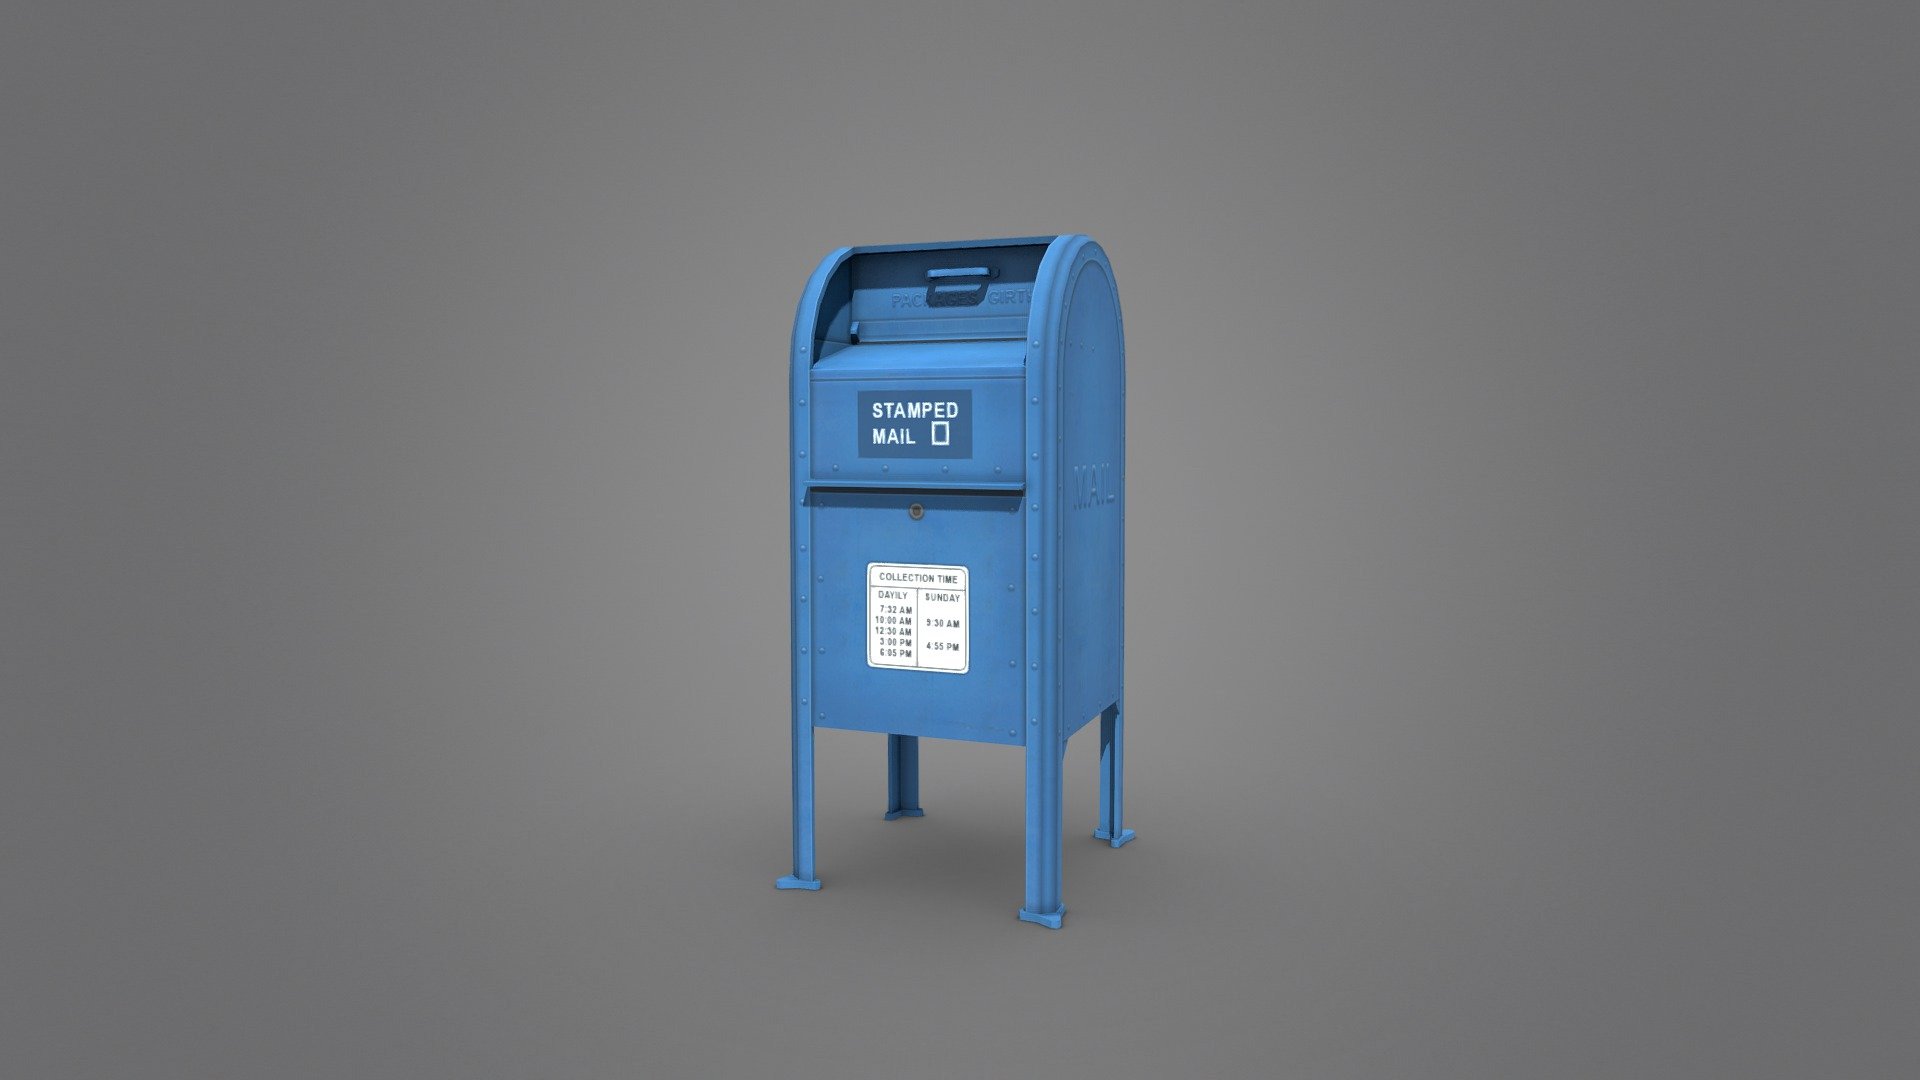 Hand painted low-poly 3D model of Mailbox. The opening is a separate object so you can animate it.

It is best for use in games and other VR / AR, real-time applications such as Unity or Unreal Engine.   

Technical details:  




1024 x 1024 Diffuse and AO textures  

604 Triangles  

347 Polygons  

344 Vertices   

Model is divided into main box and the opening door.   

Model is fully textured with all materials applied.   

Pivot points are correctly placed.  

Model is scaled to approximate real world size (centimeters).  

All nodes, materials and textures are appropriately named.  

Lot of additional file formats included (Blender, Unity, Maya etc.)

More file formats are available in additional zip file on product page.

Please feel free to contact me if you have any questions or need any support for this asset.

Support e-mail: support@rescue3d.com - Mailbox - Buy Royalty Free 3D model by Rescue3D Assets (@rescue3d) 3d model